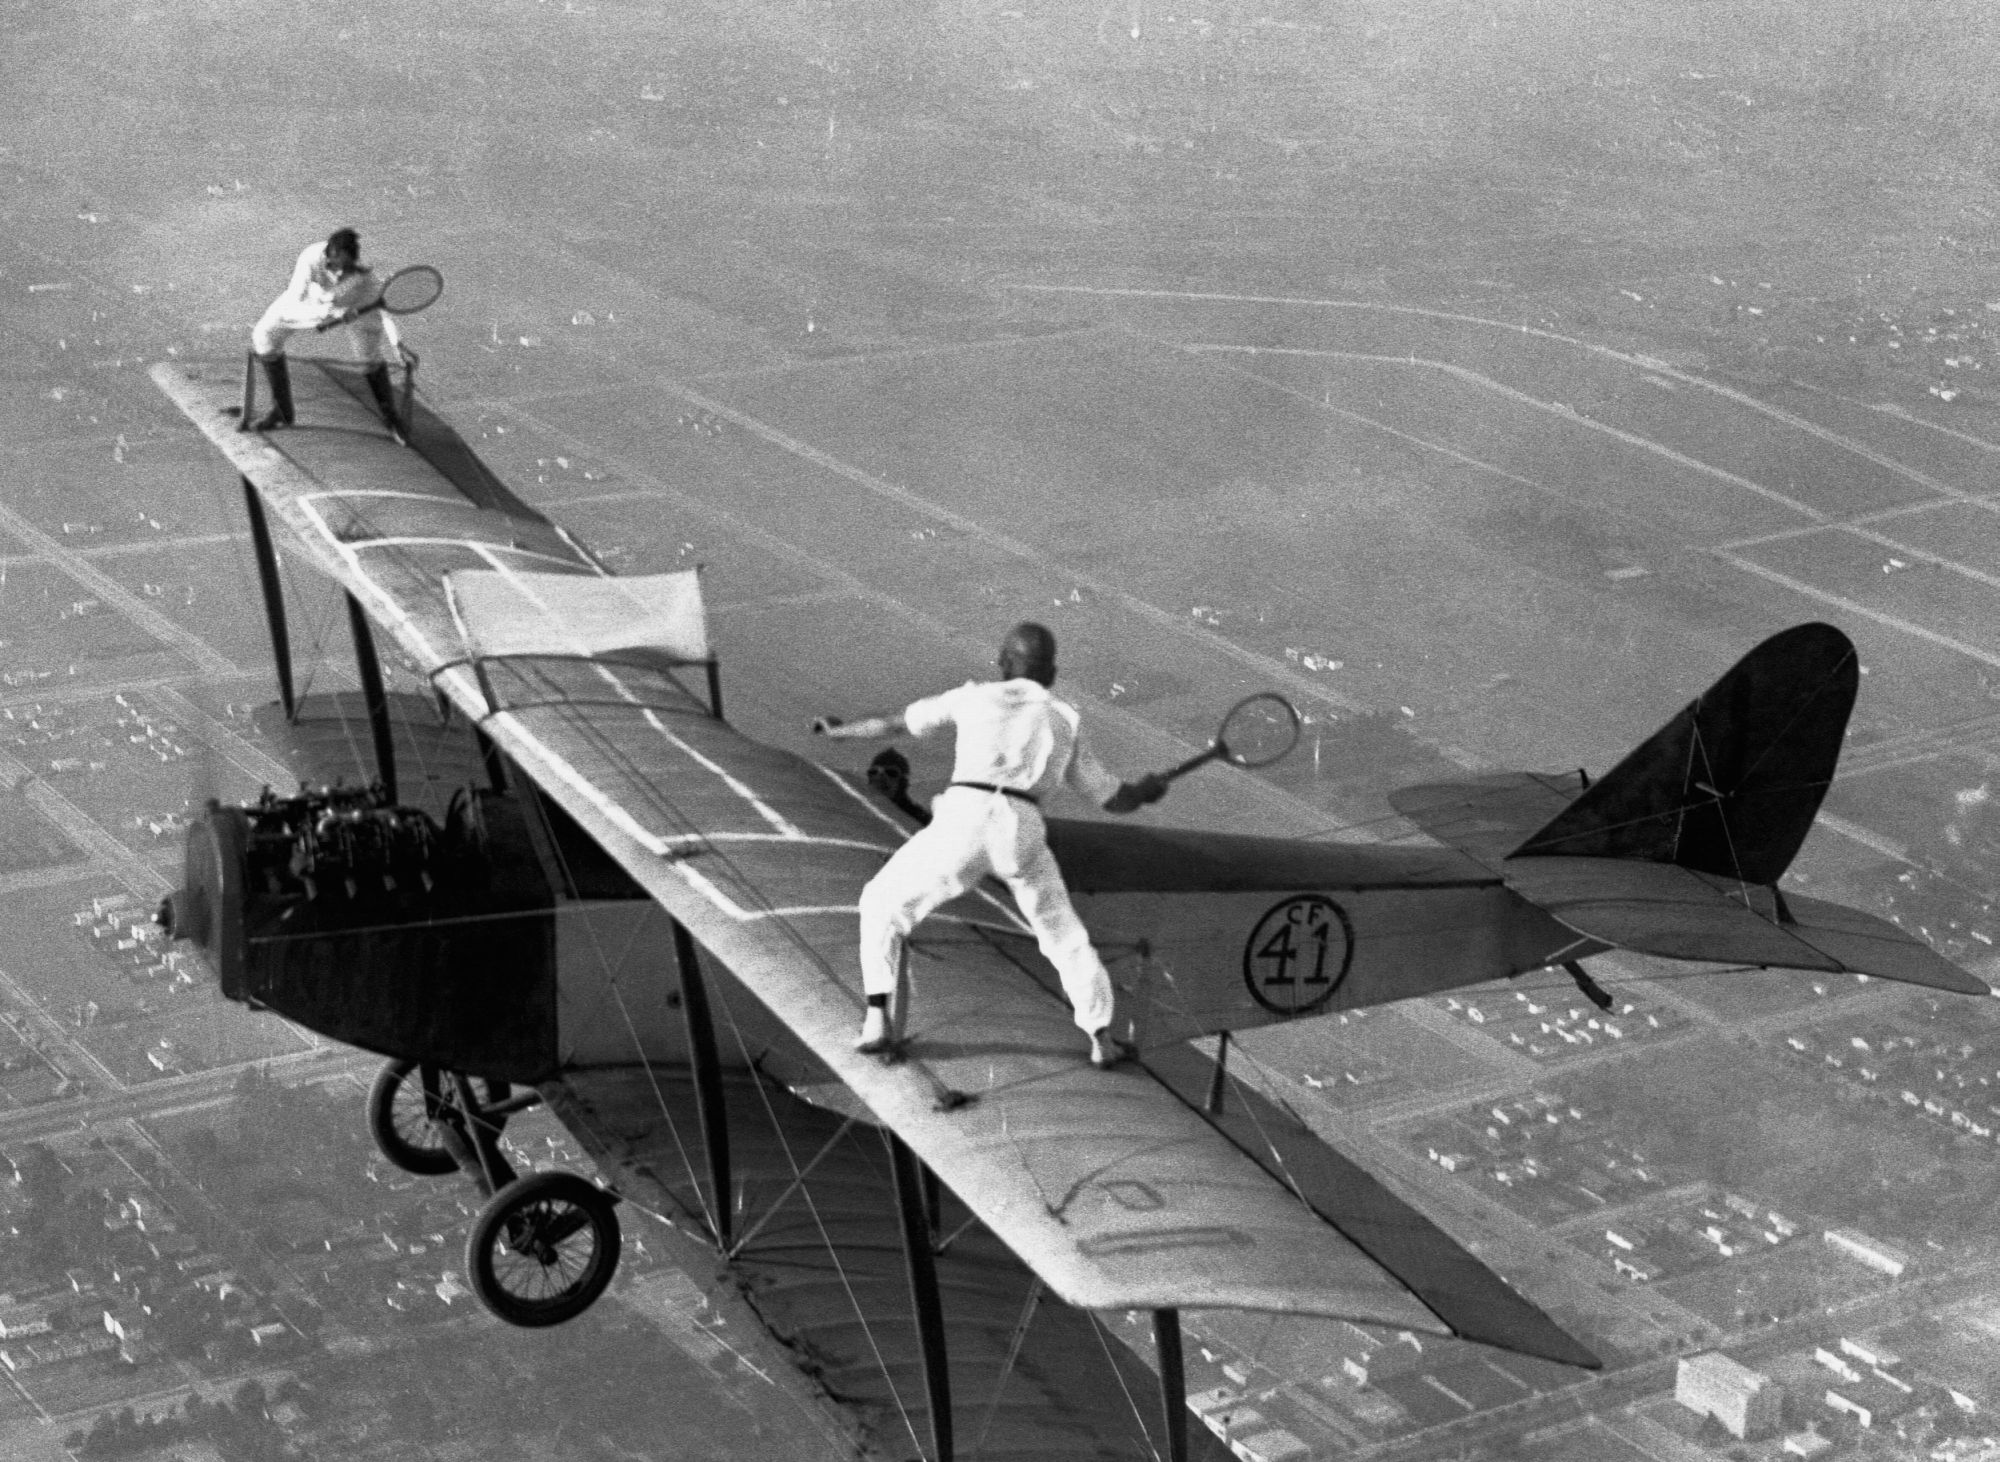 Daredevils Gladys Roy and Ivan Unger Play Tennis In Sky, riding on the wings of a biplane as it flies over the city in November 1925.